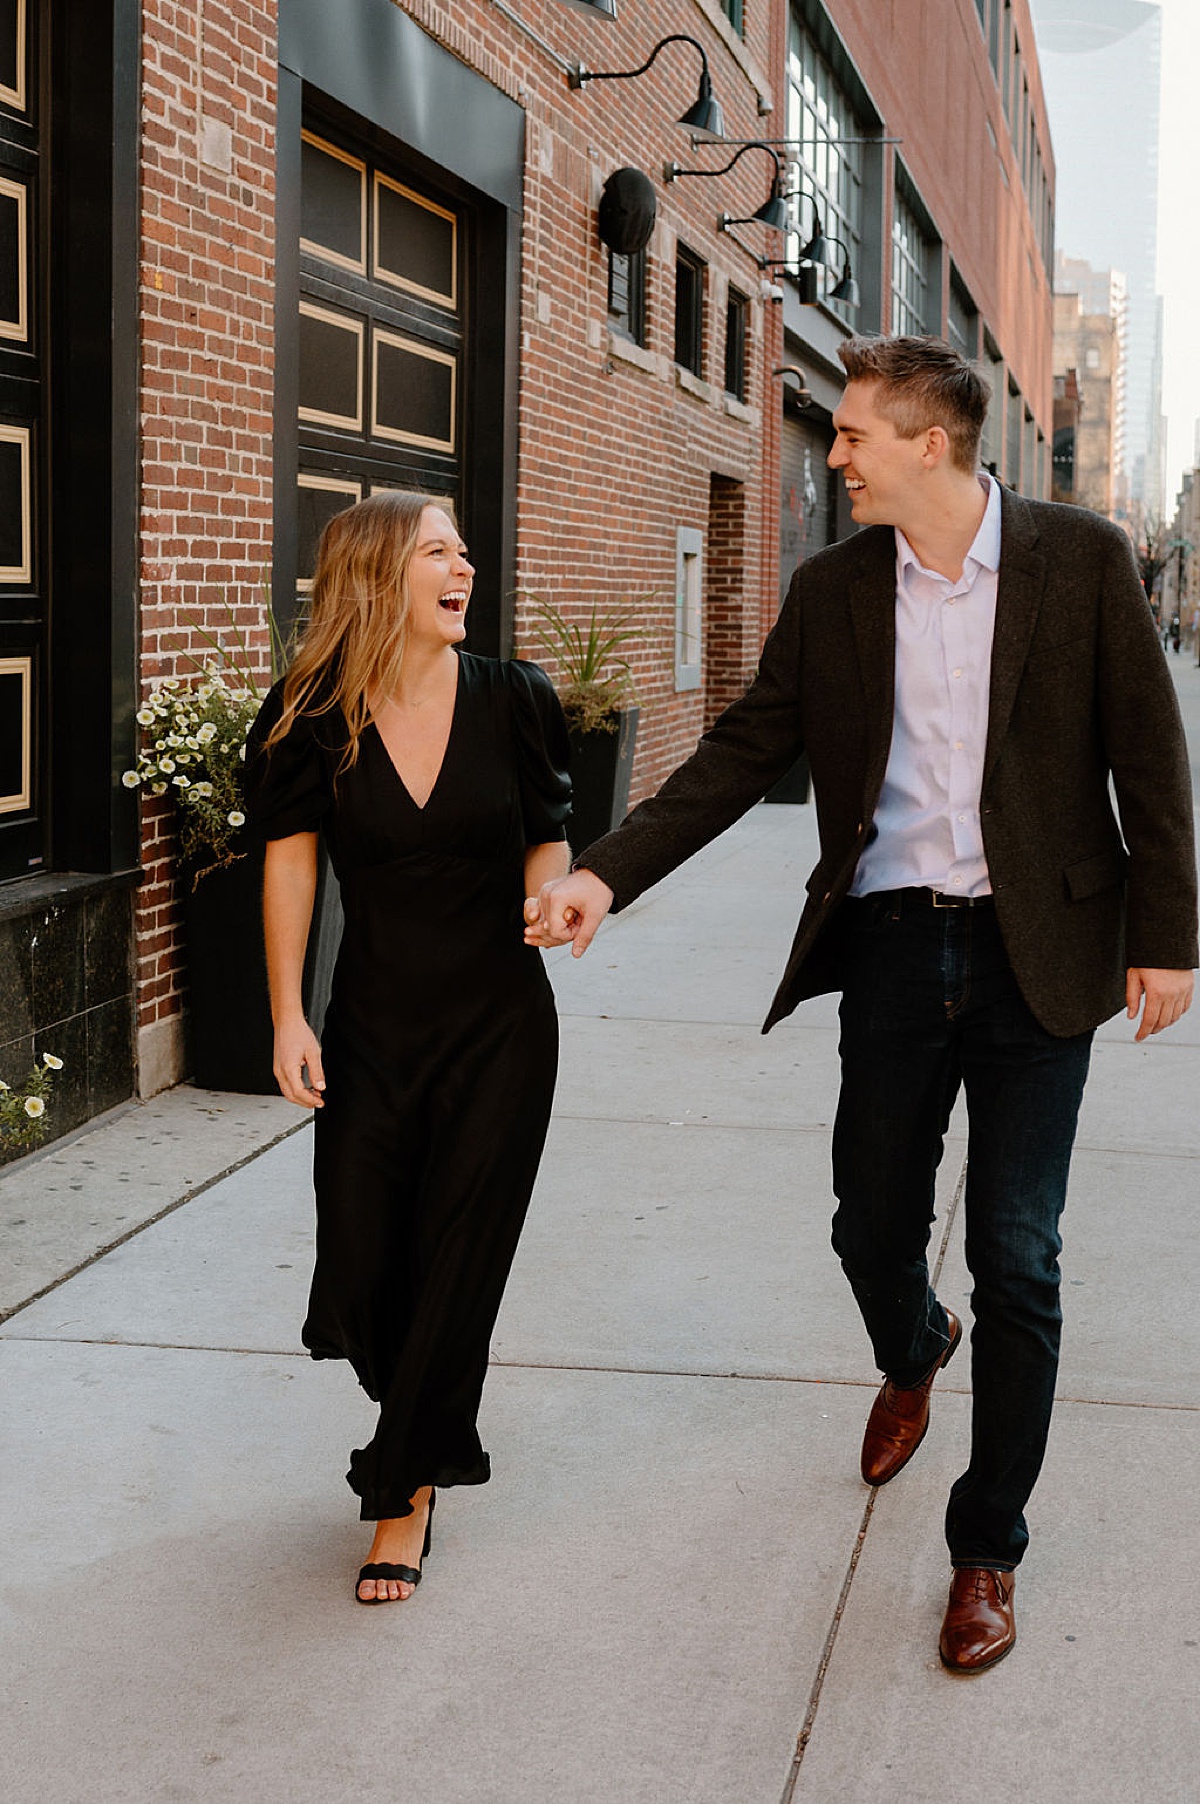 Millennial couple stroll a brick wall street while holding hands during engagement shoot with Chicago wedding photographer